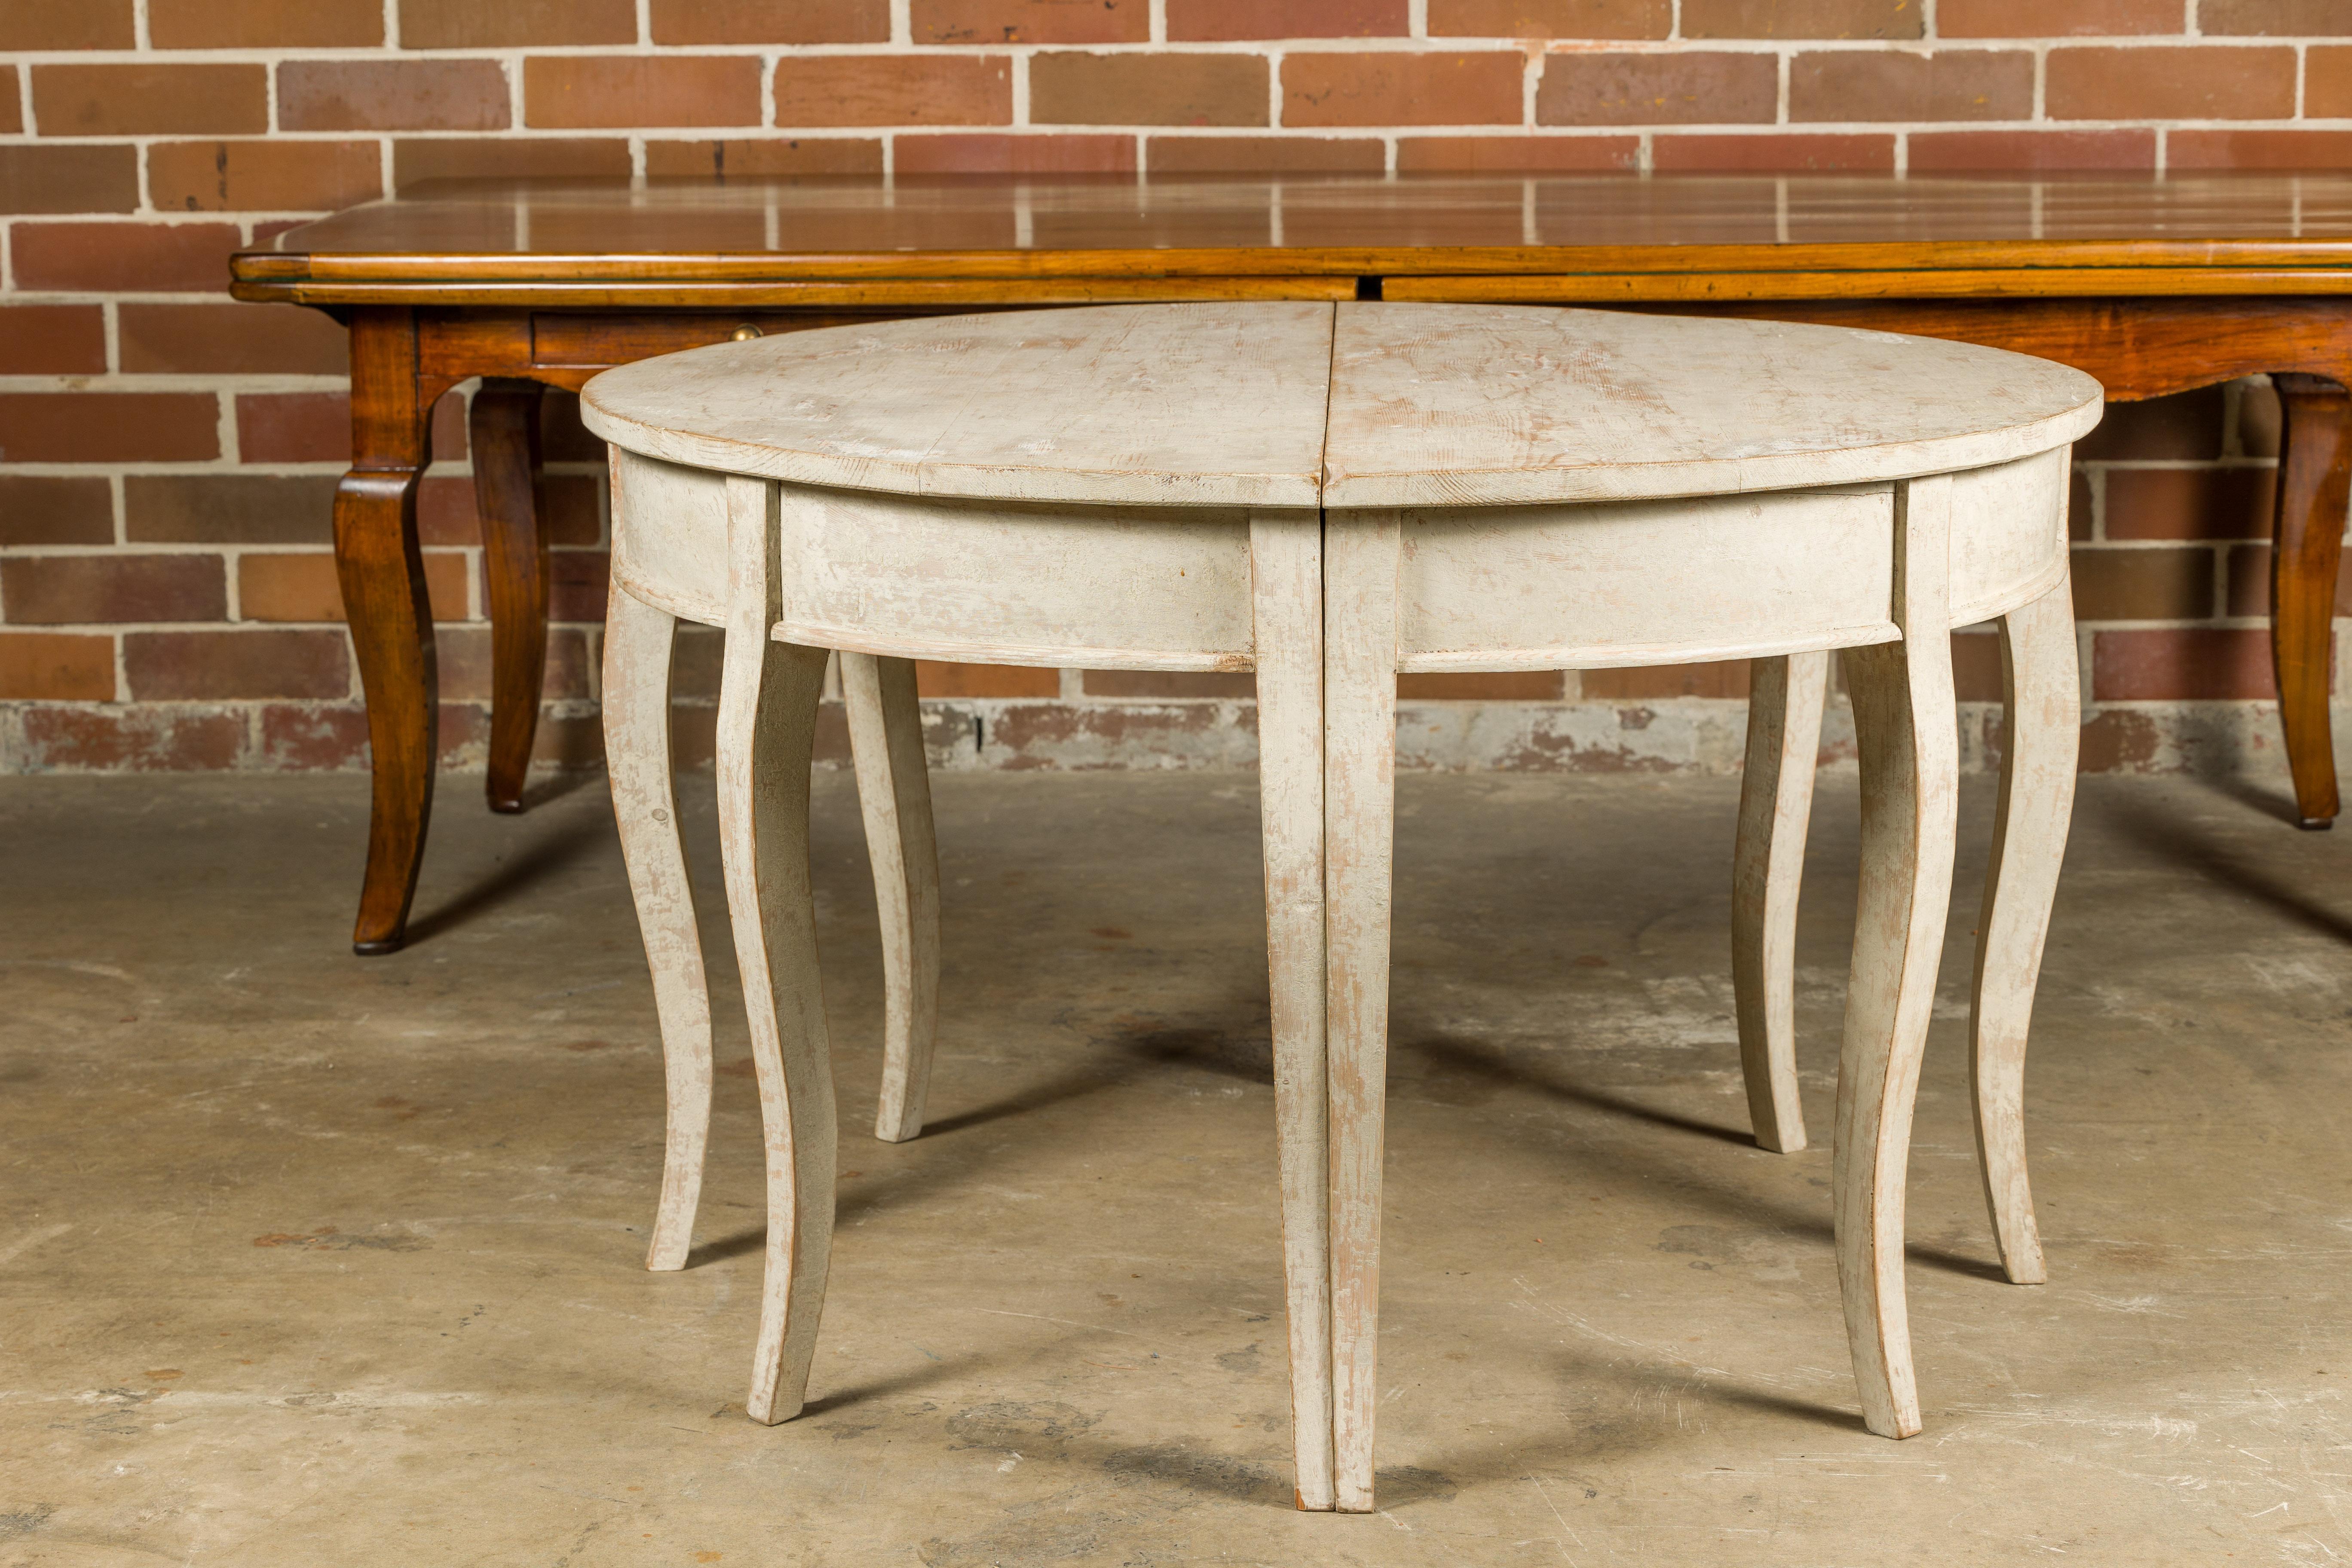 Swedish 19th Century Painted Demilune Tables with Cabriole Legs, a Pair For Sale 5